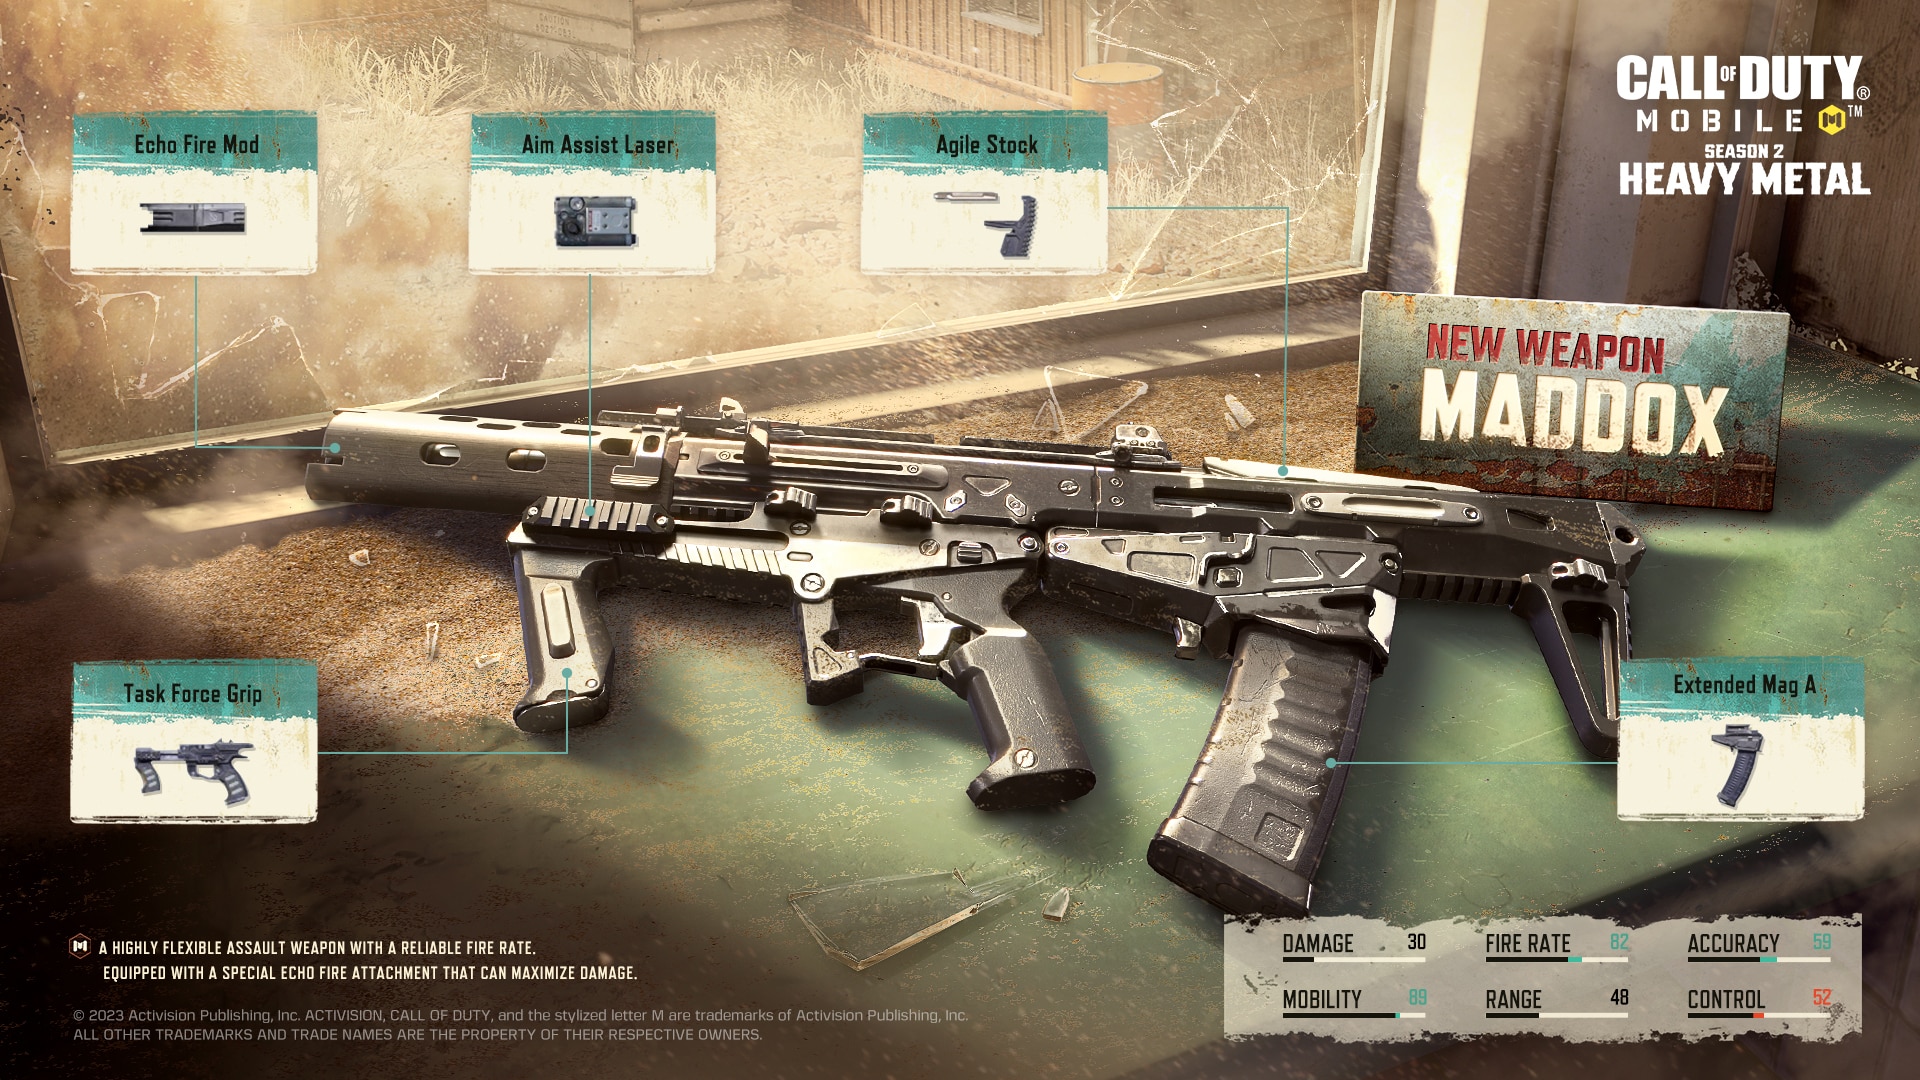 call of duty mobile maddox assault rifle